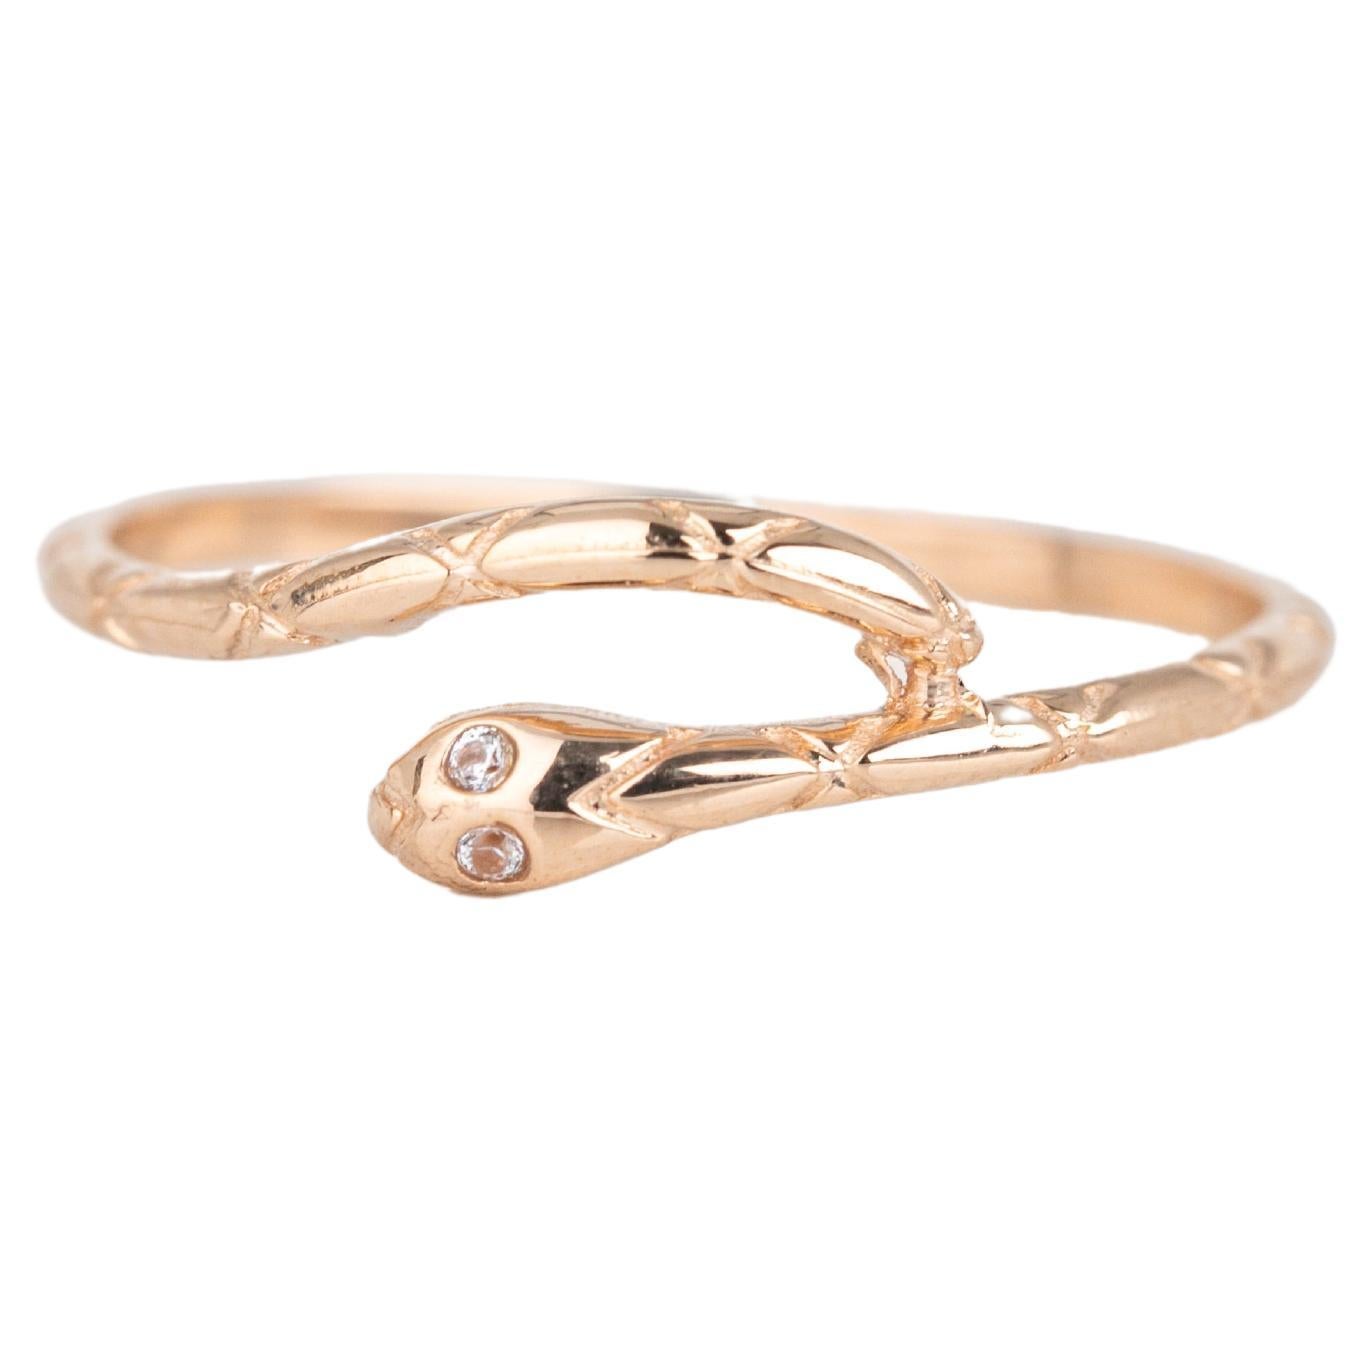 14k Gold Snake Ring, Serpent Shape Pinky, Stackable Ring with Moissanite